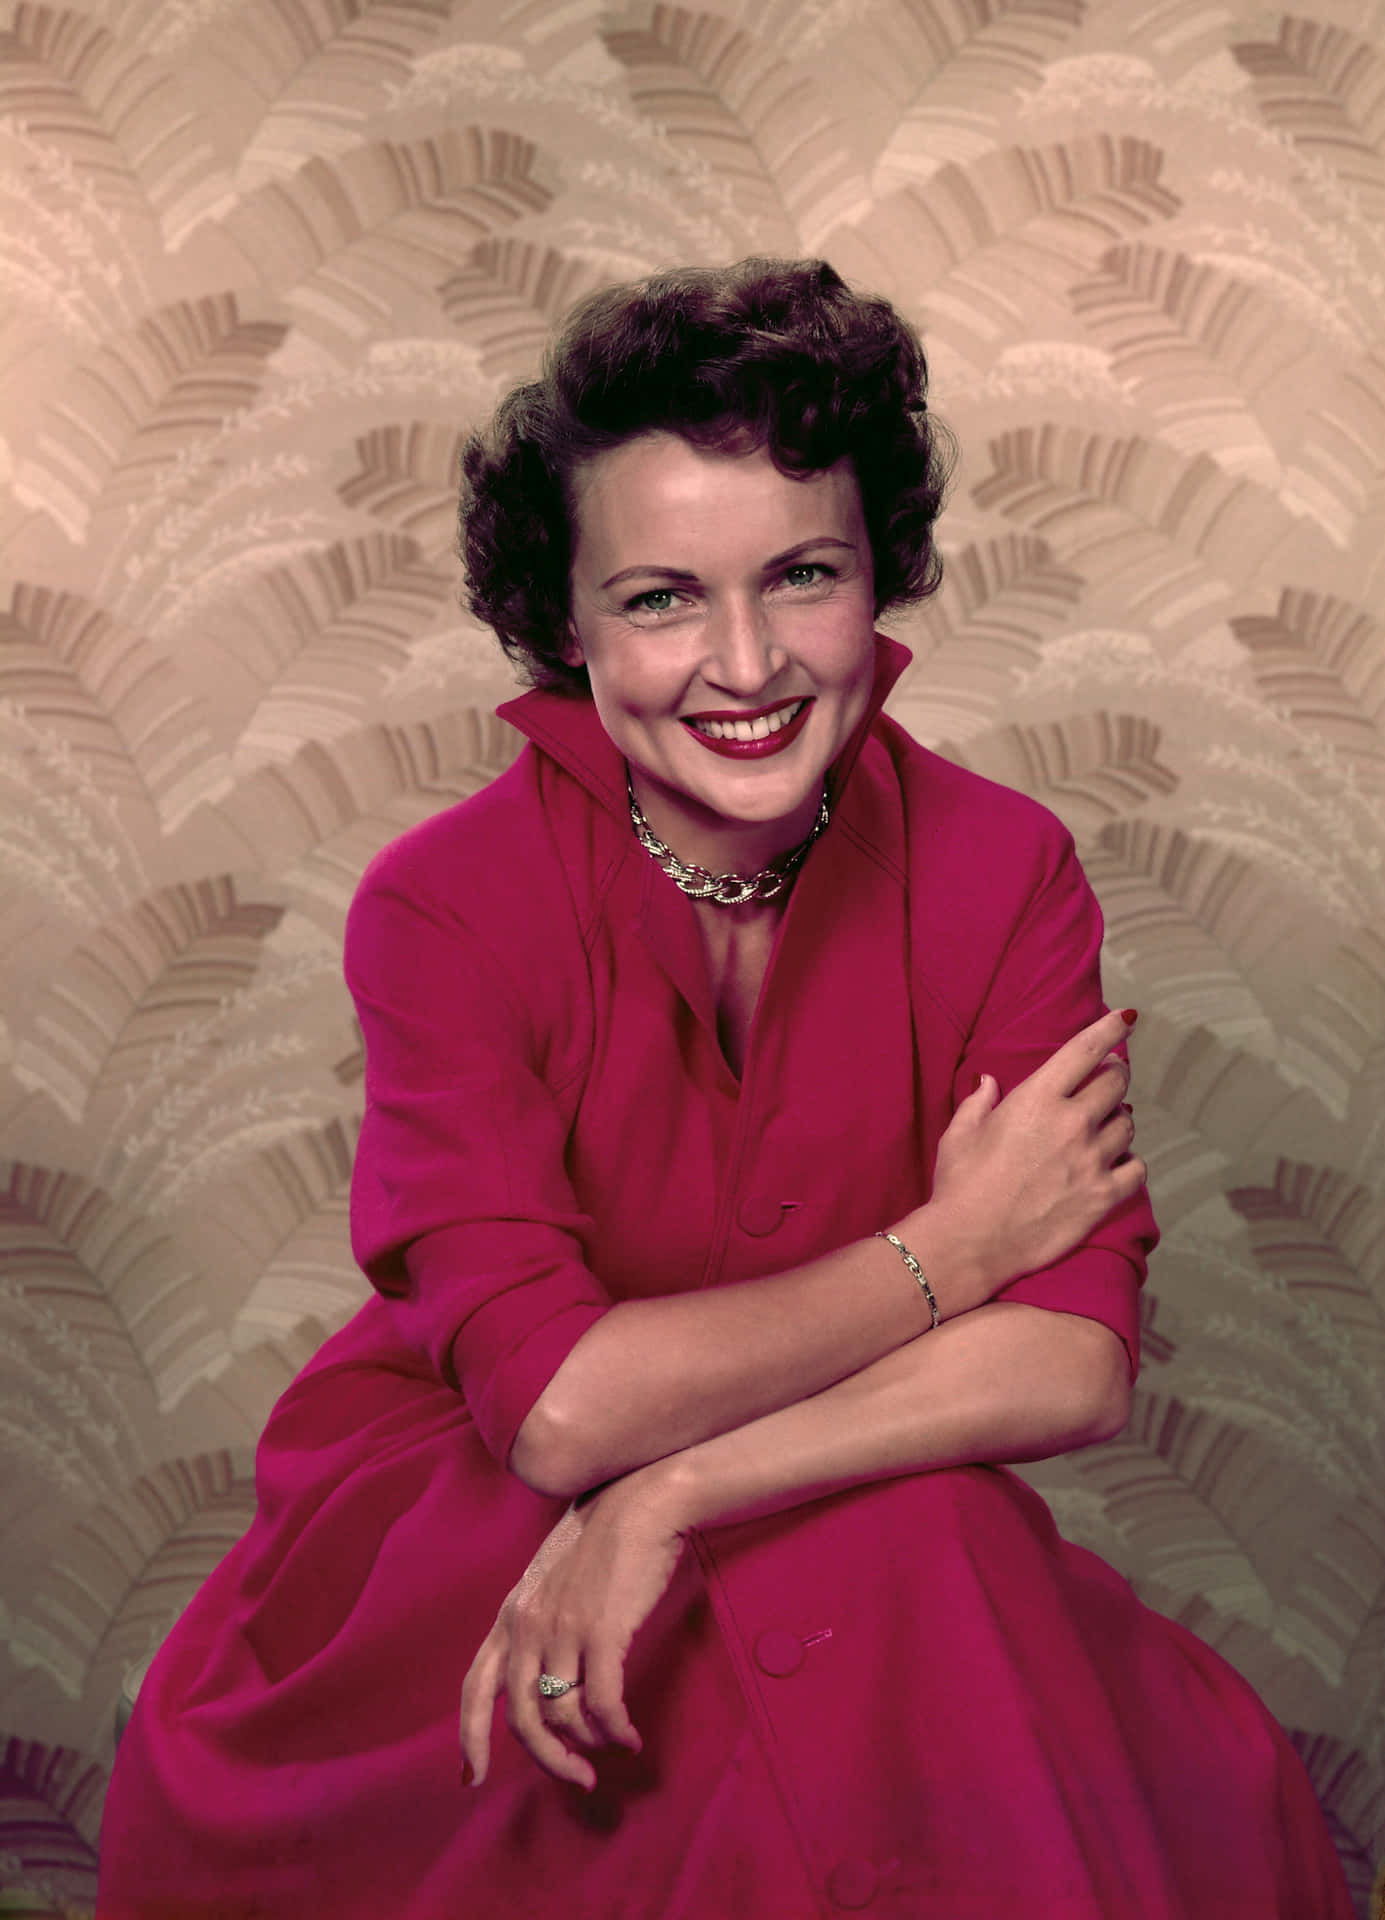 Betty White radiant in her younger years